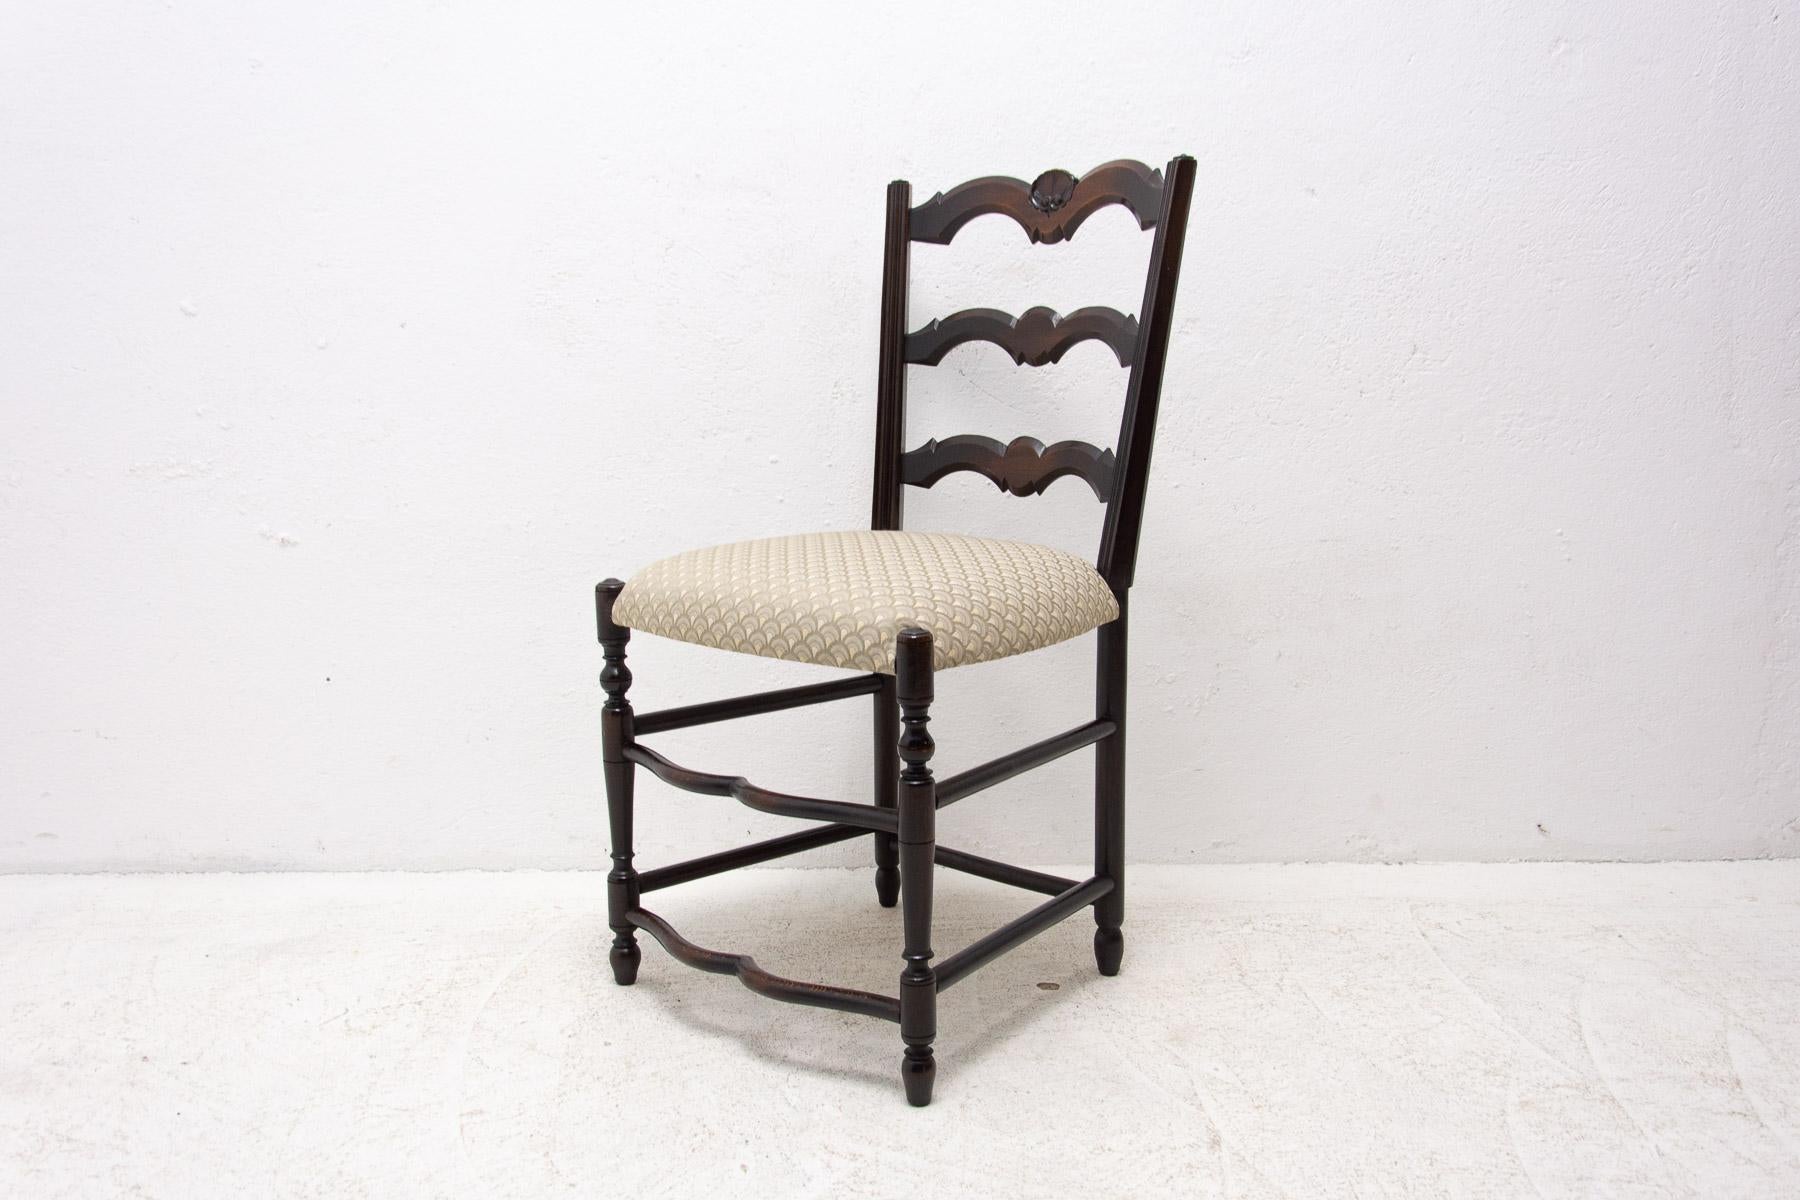 Adolf Loose-style chair, probably made in the second half of the 20th century. The same chair is located in Brummel’s villa in Pilsen, see photos. The chair is in excellent condition, it has new upholstery. Made of beech wood.

Measures: Height: 84